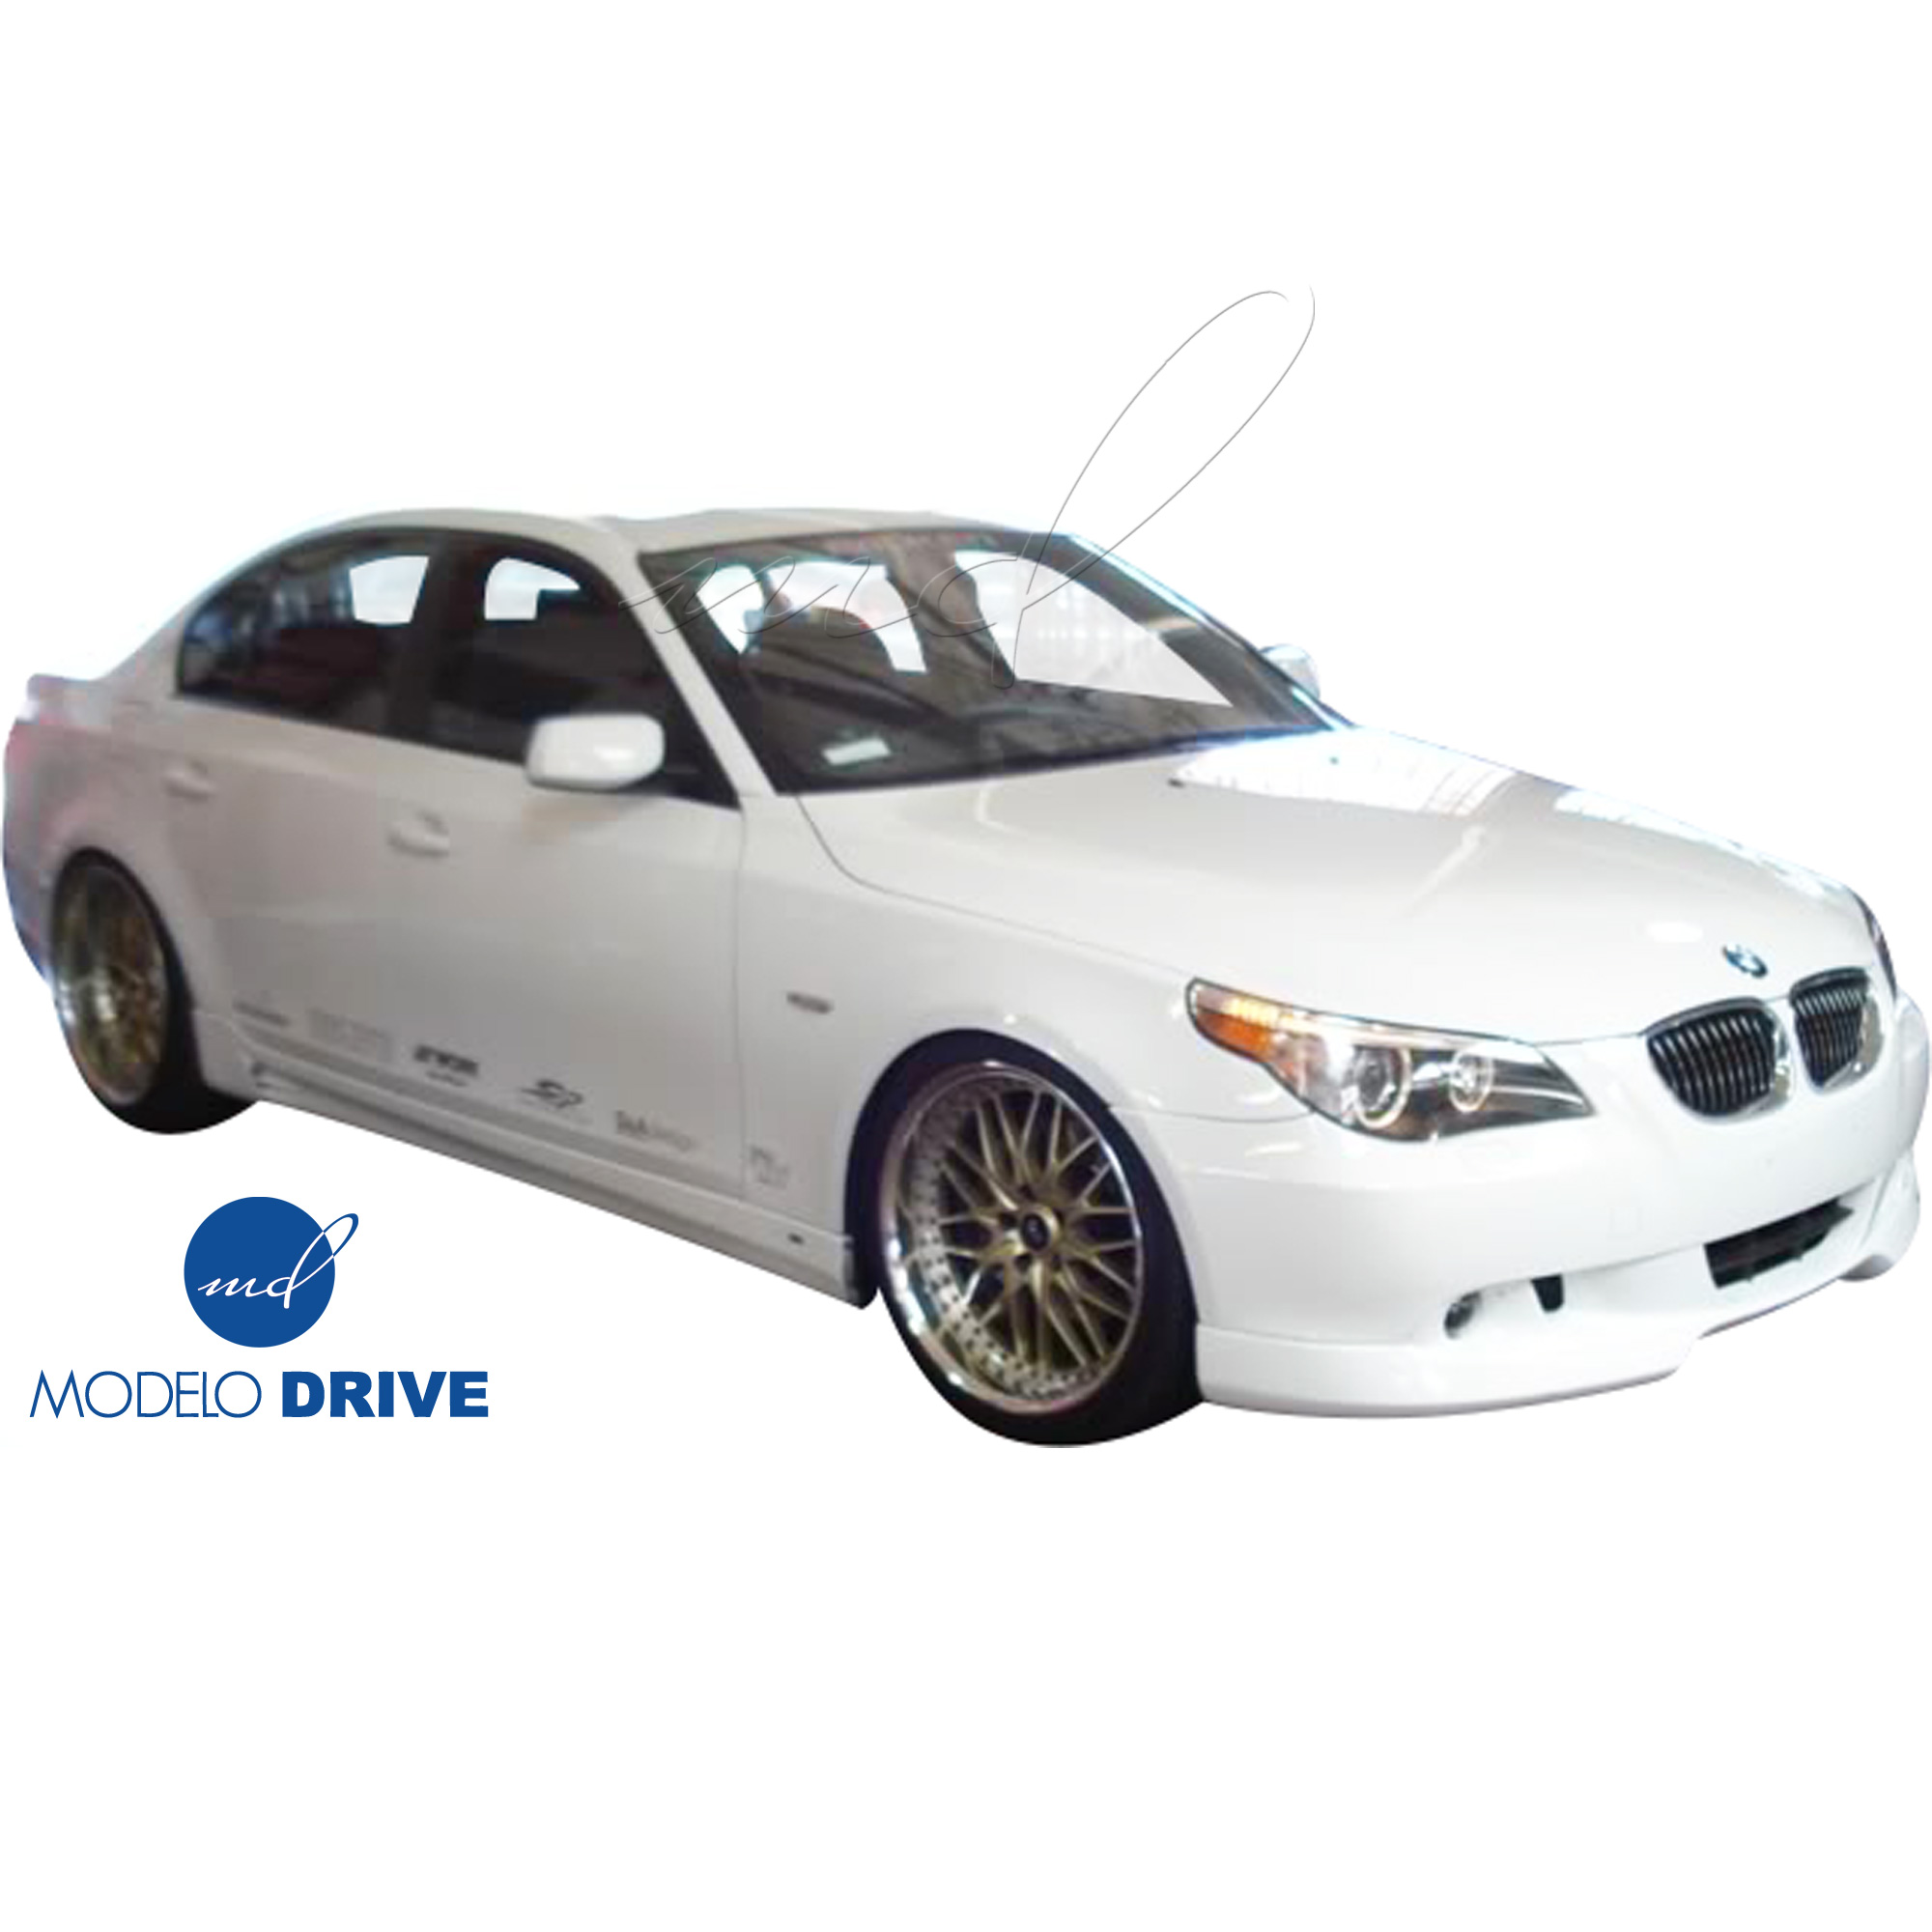 ModeloDrive FRP ASCH Front Valance Add-on > BMW 5-Series E60 2004-2010 > 4dr - Image 7